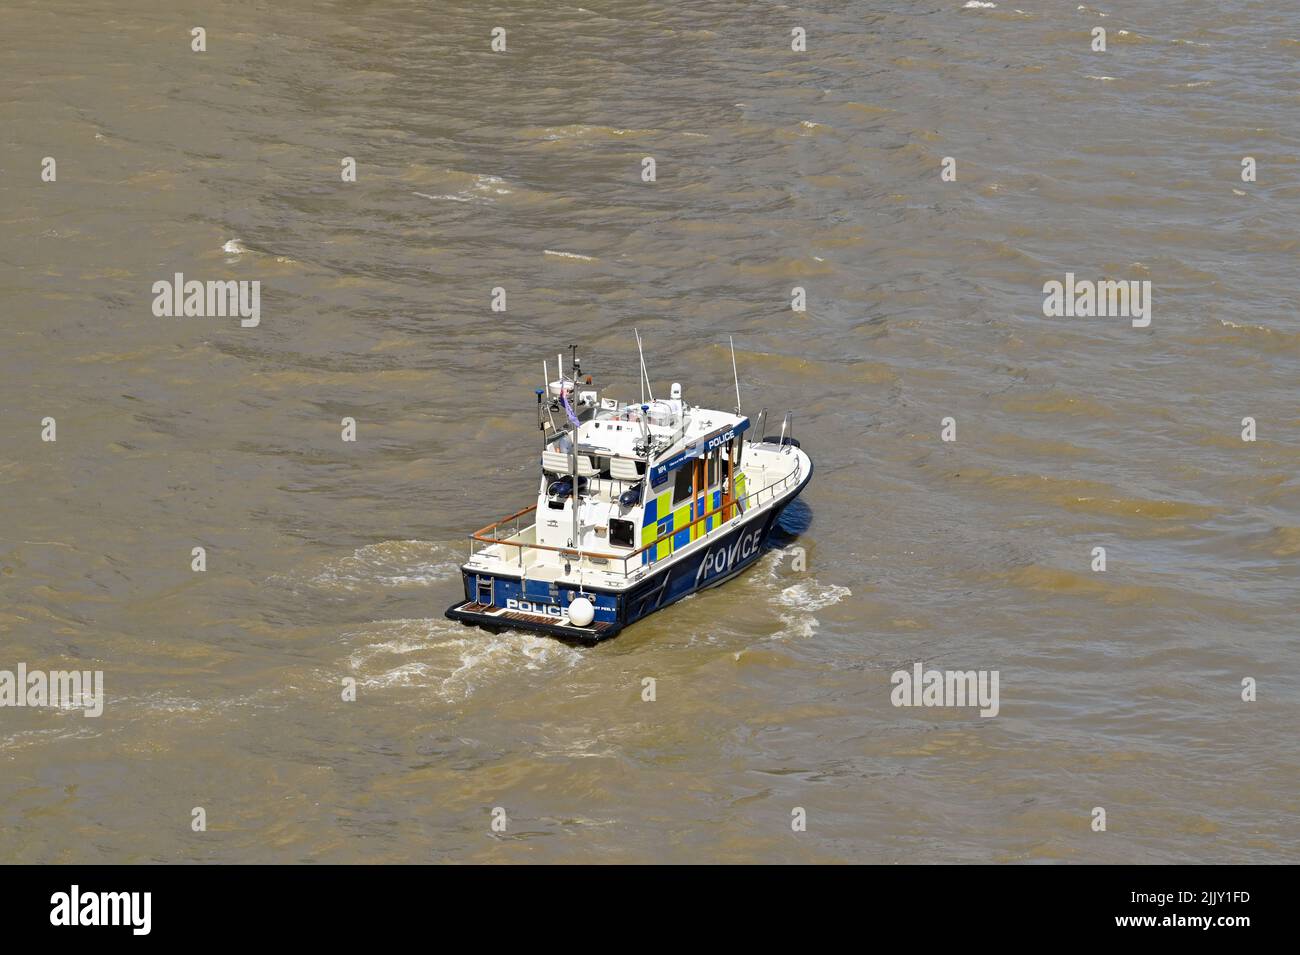 London, UK - June 2022: Police patrol boat on the River Thames in the centre of London Stock Photo